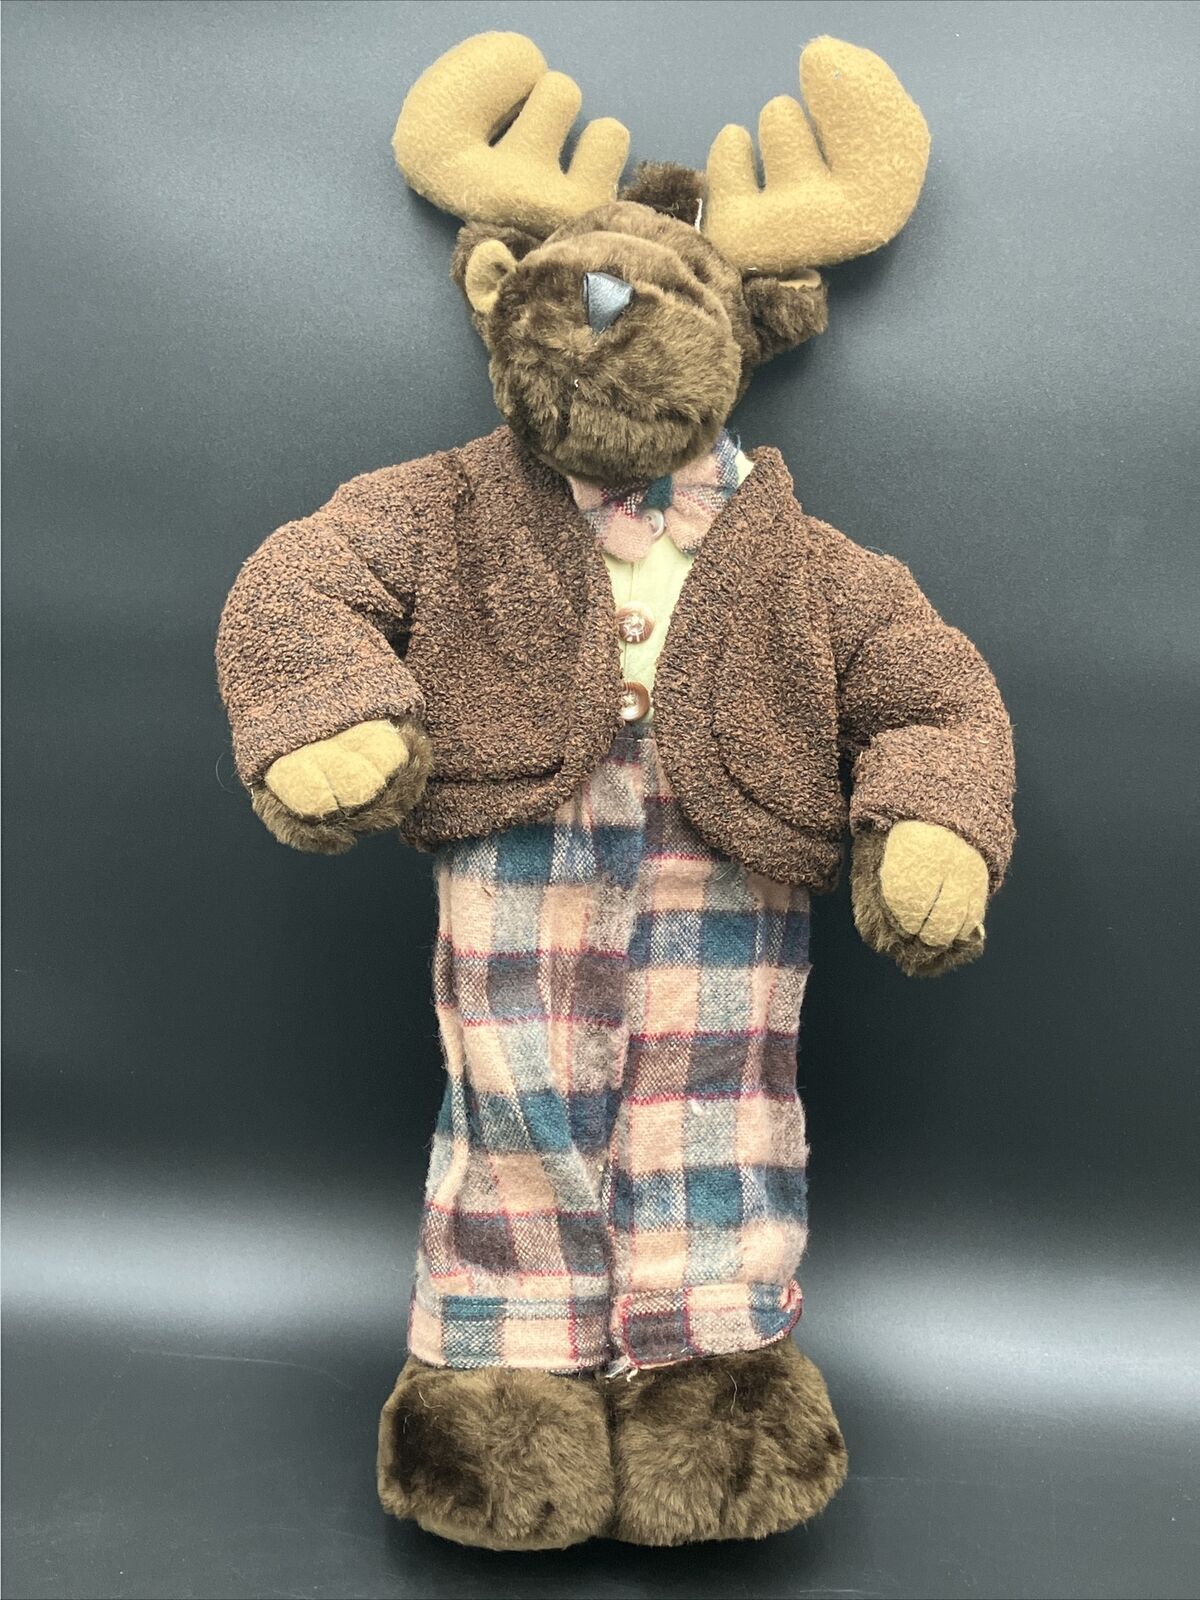 Vintage 22” Tall Moose Dressed In Gentleman Clothing. Wood And Wire Stuffed.